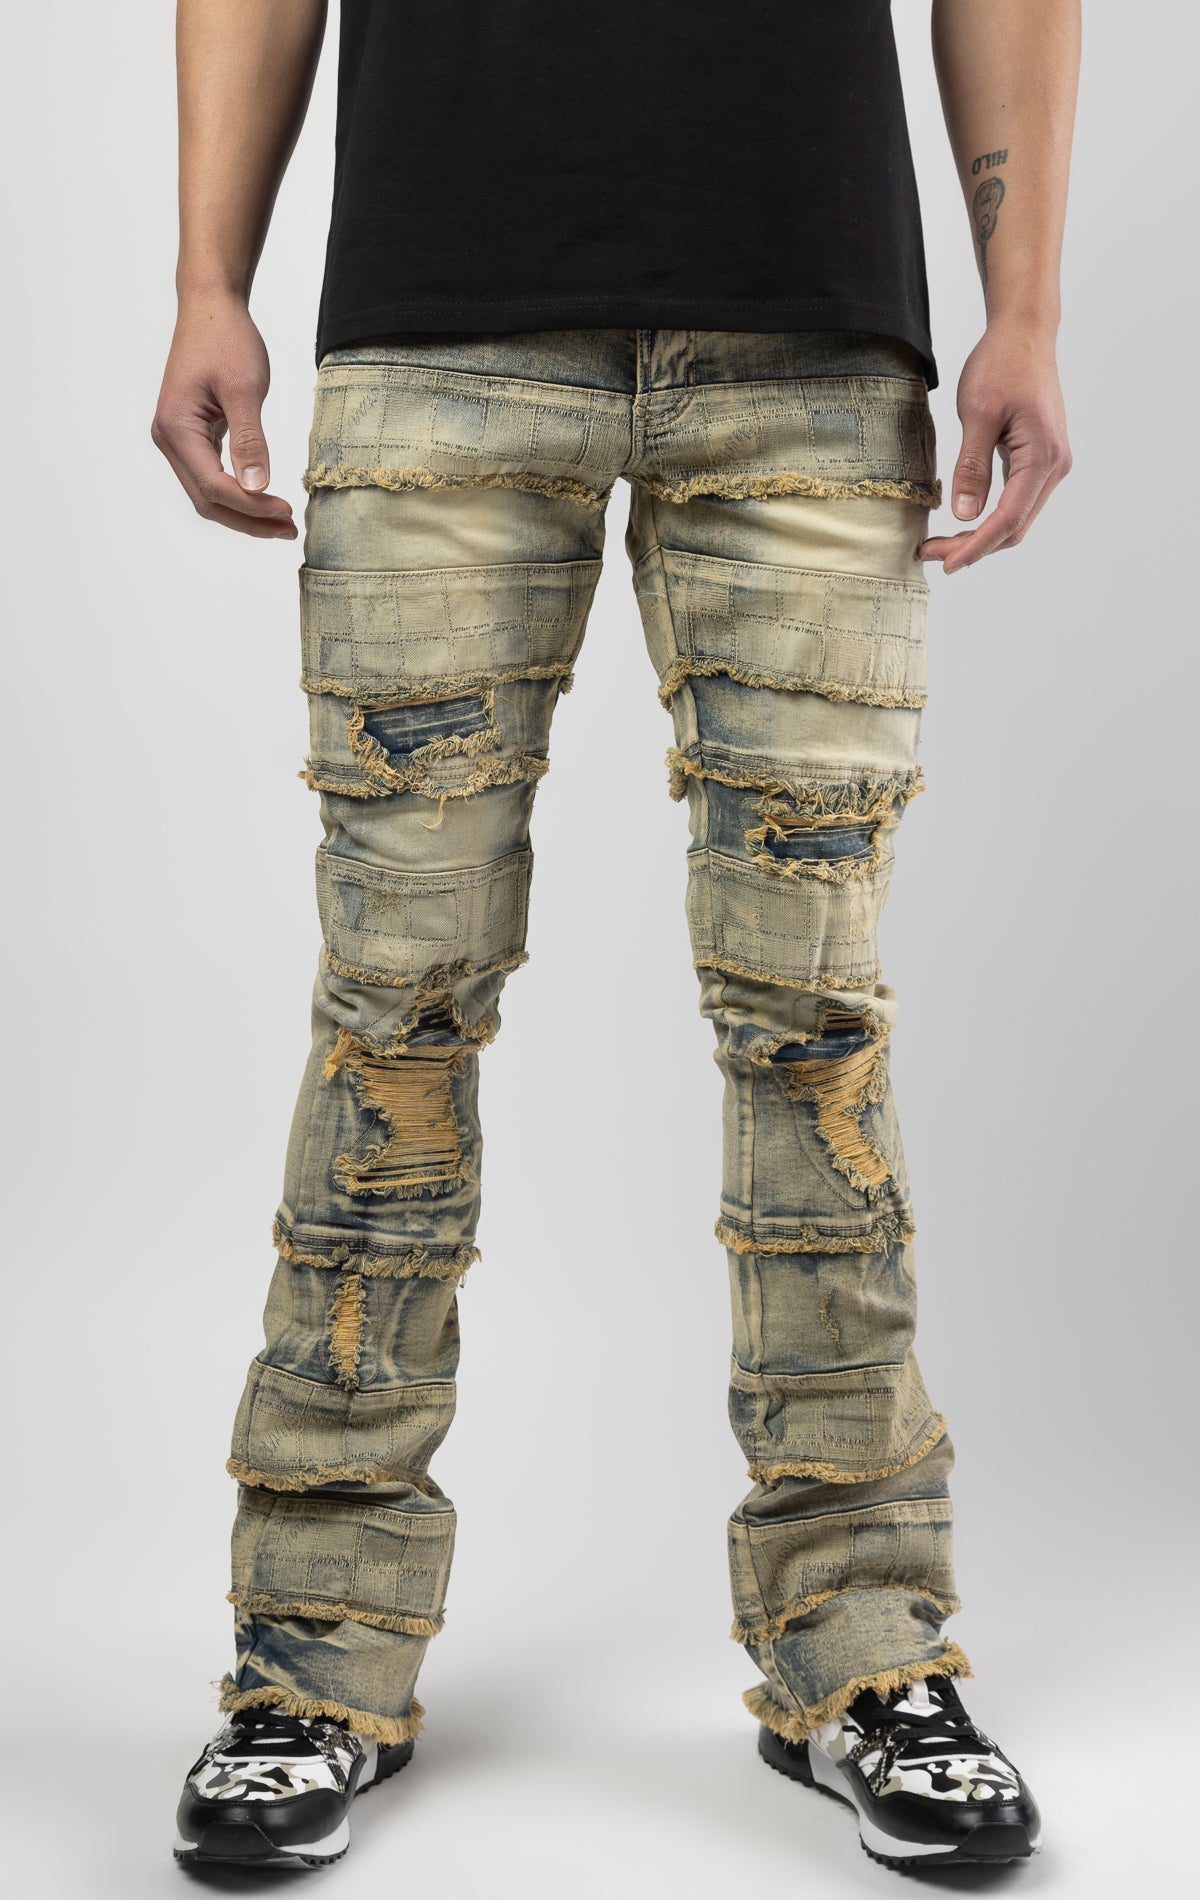 Dirt wash iconic stacked jeans crafted from high-quality, durable denim fabric consisting of 98% cotton and 2% spandex with a semi flare silhouette and a length of 35